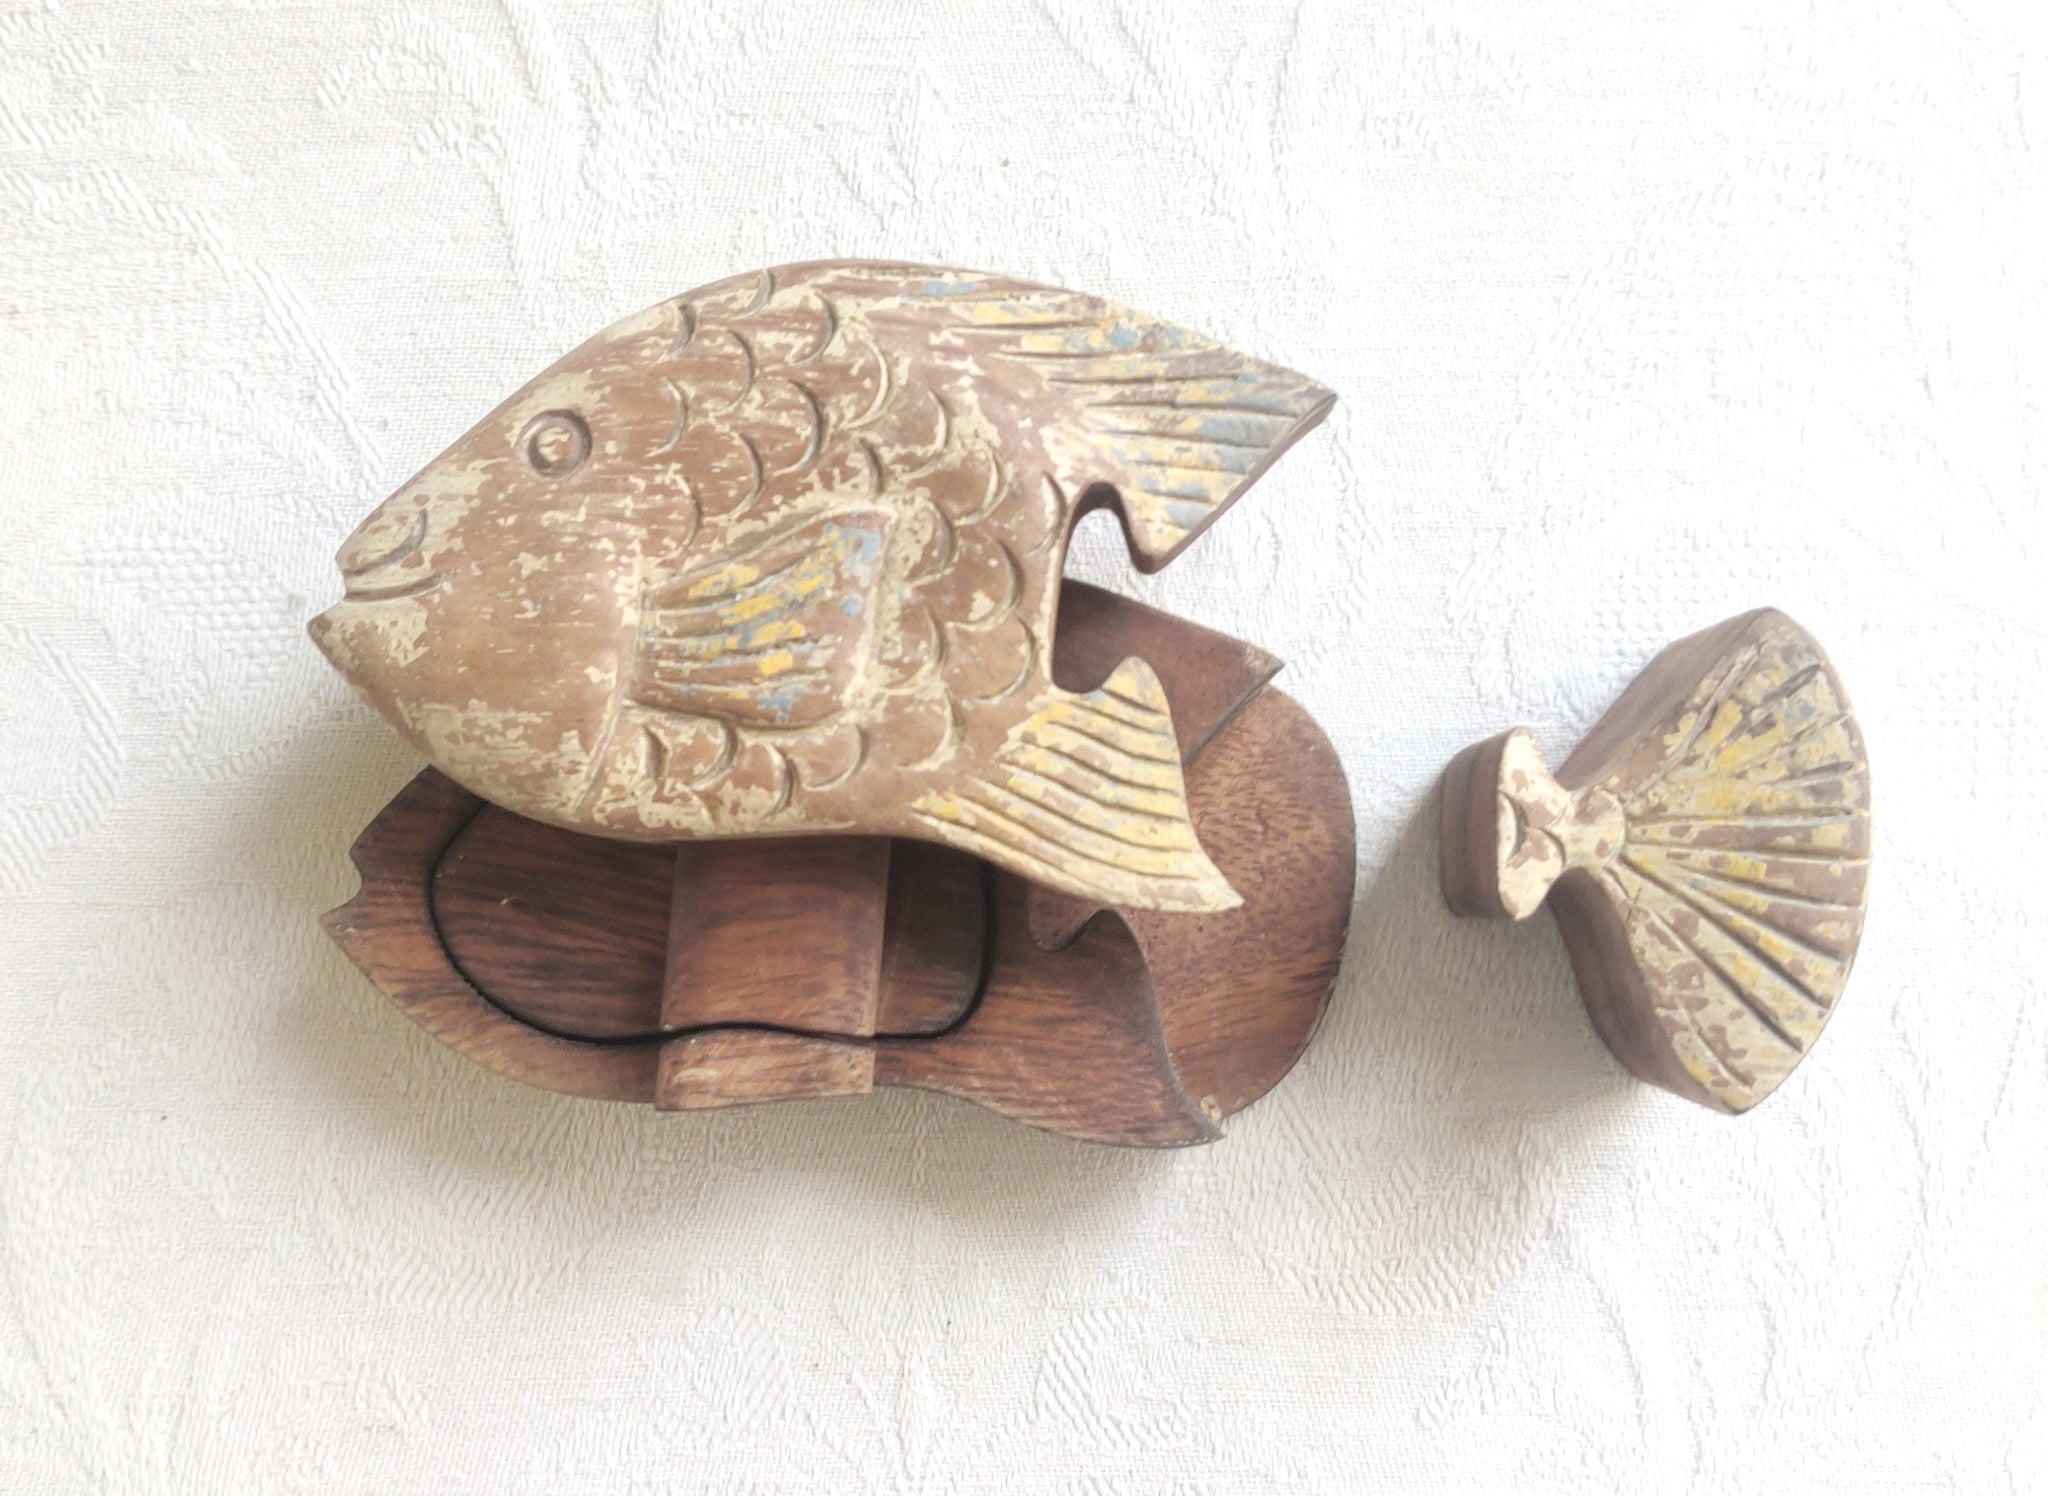 Home Decor. Table Decor-Storage Accessory. Hand Carved Wooden Fish